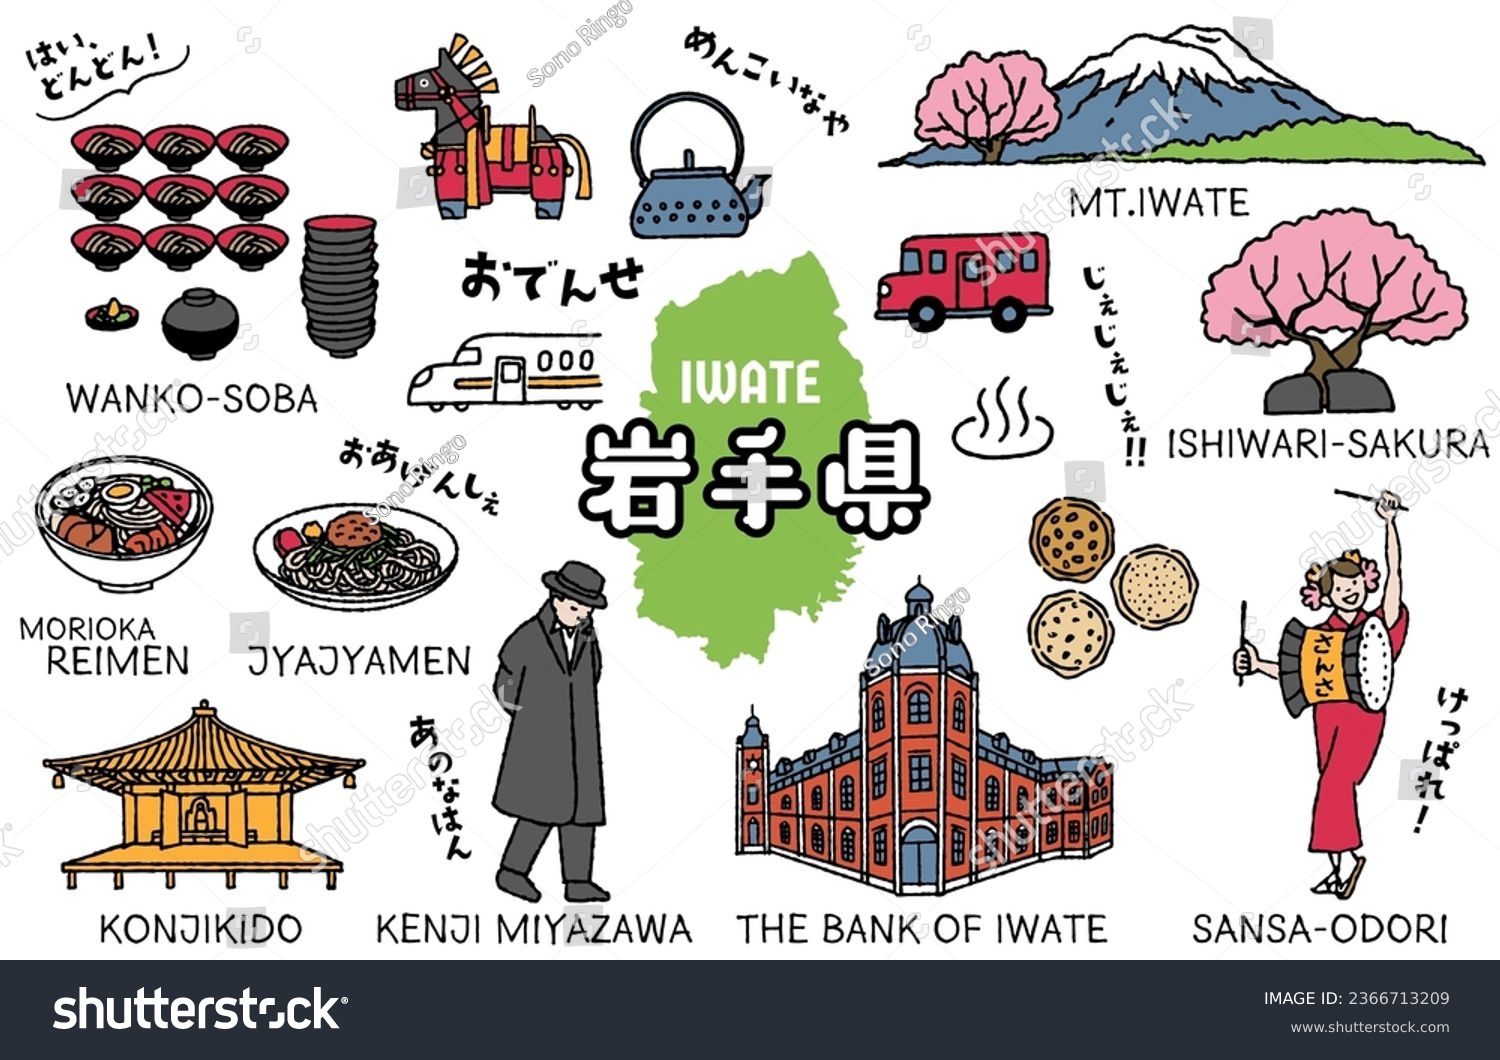 SVG of Simple and cute Iwate Prefecture-related illustration set (colorful)

The Japanese characters mean 